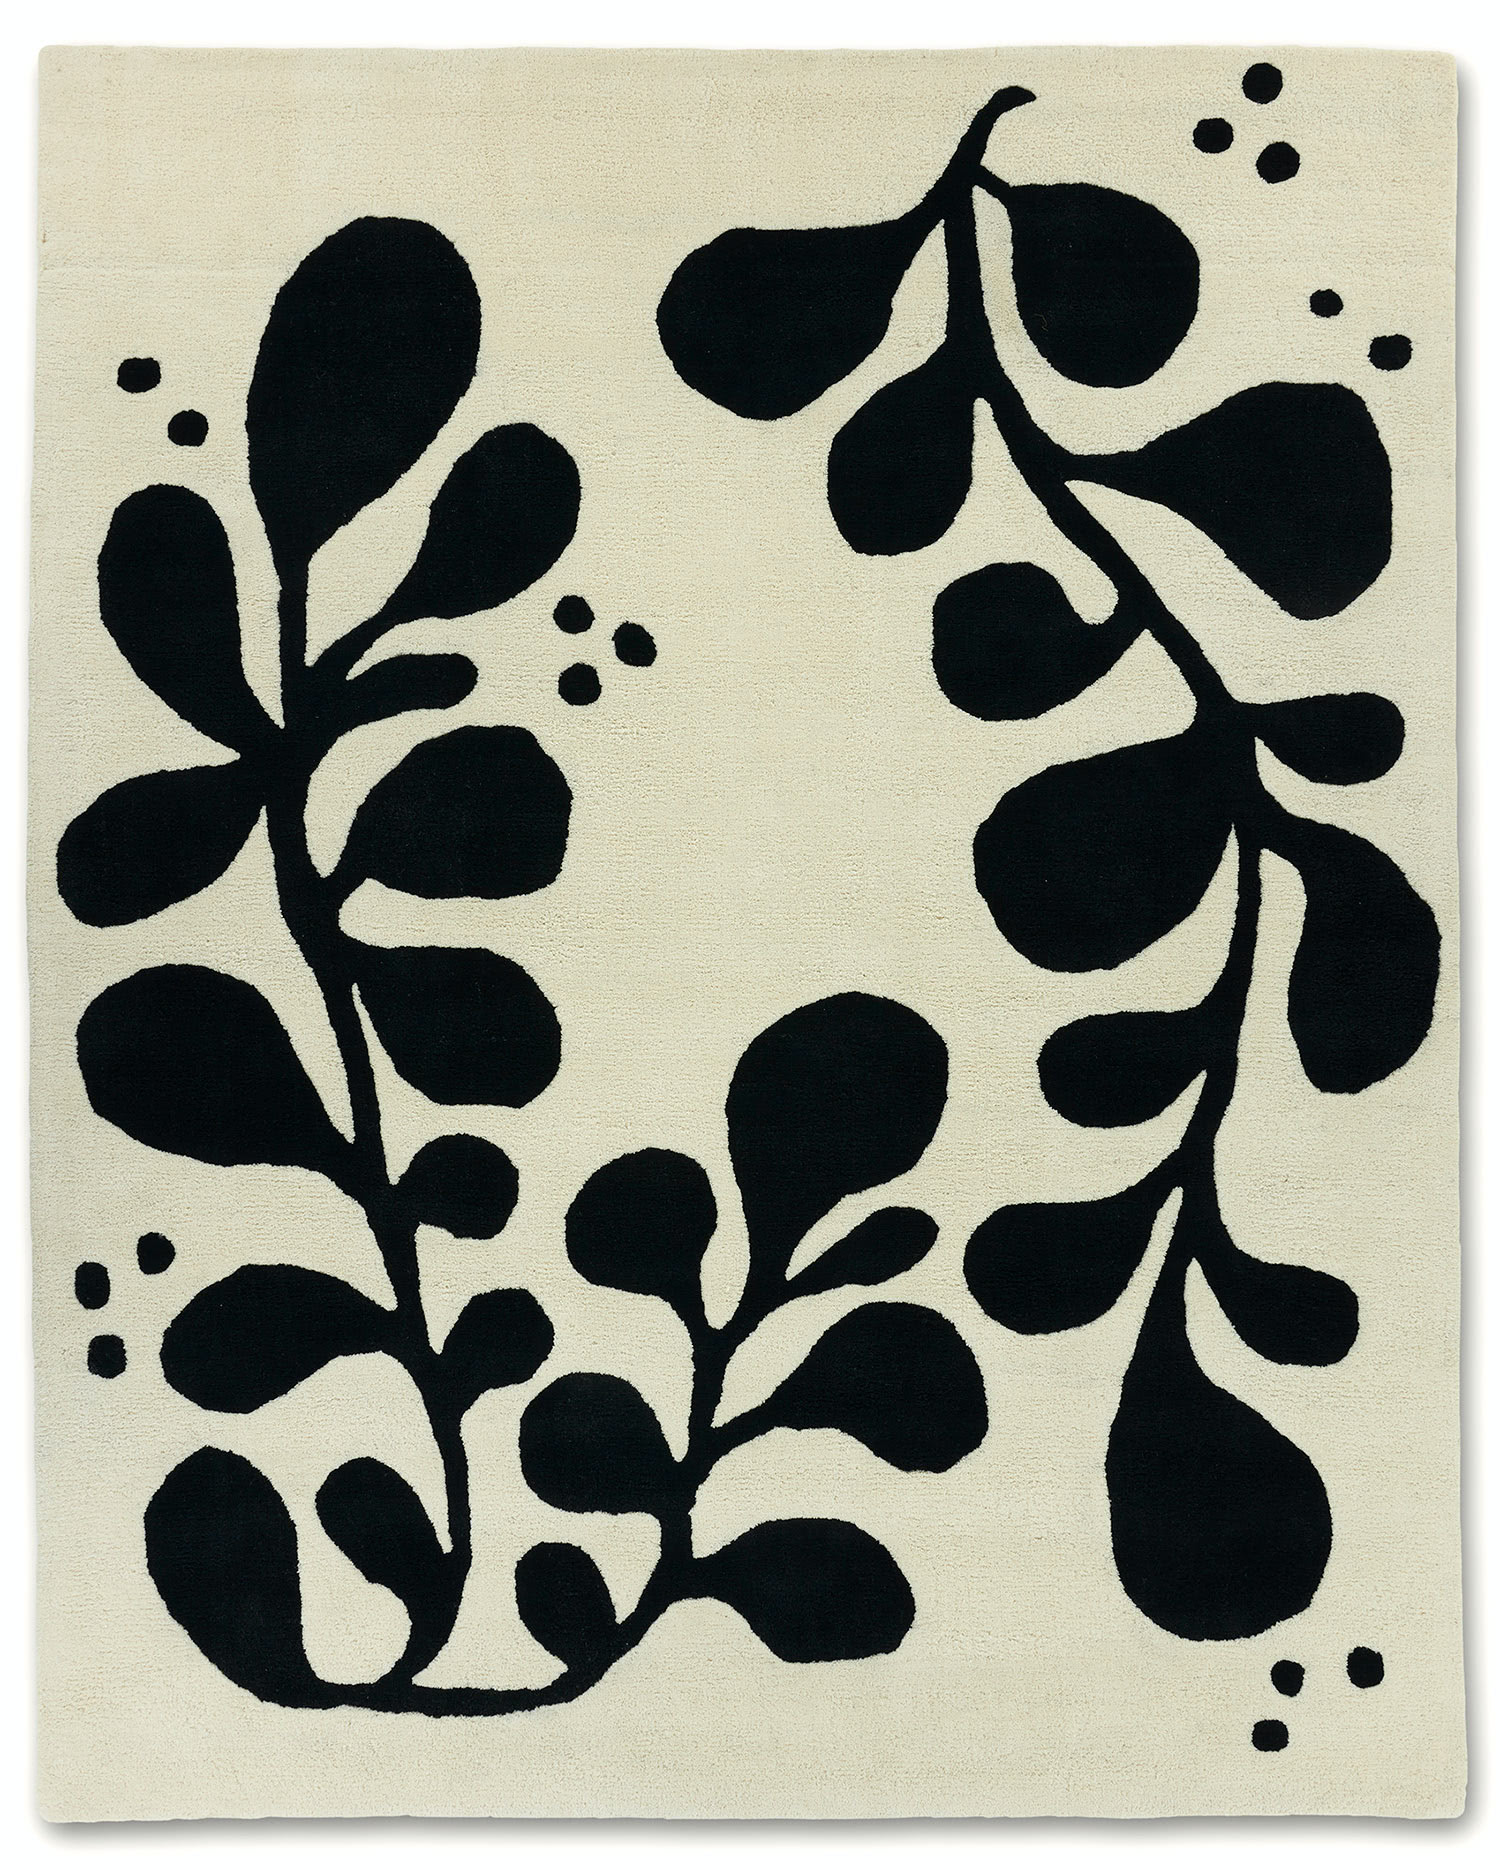 A neutral and black area rug with abstract designs on it called Vine Tango